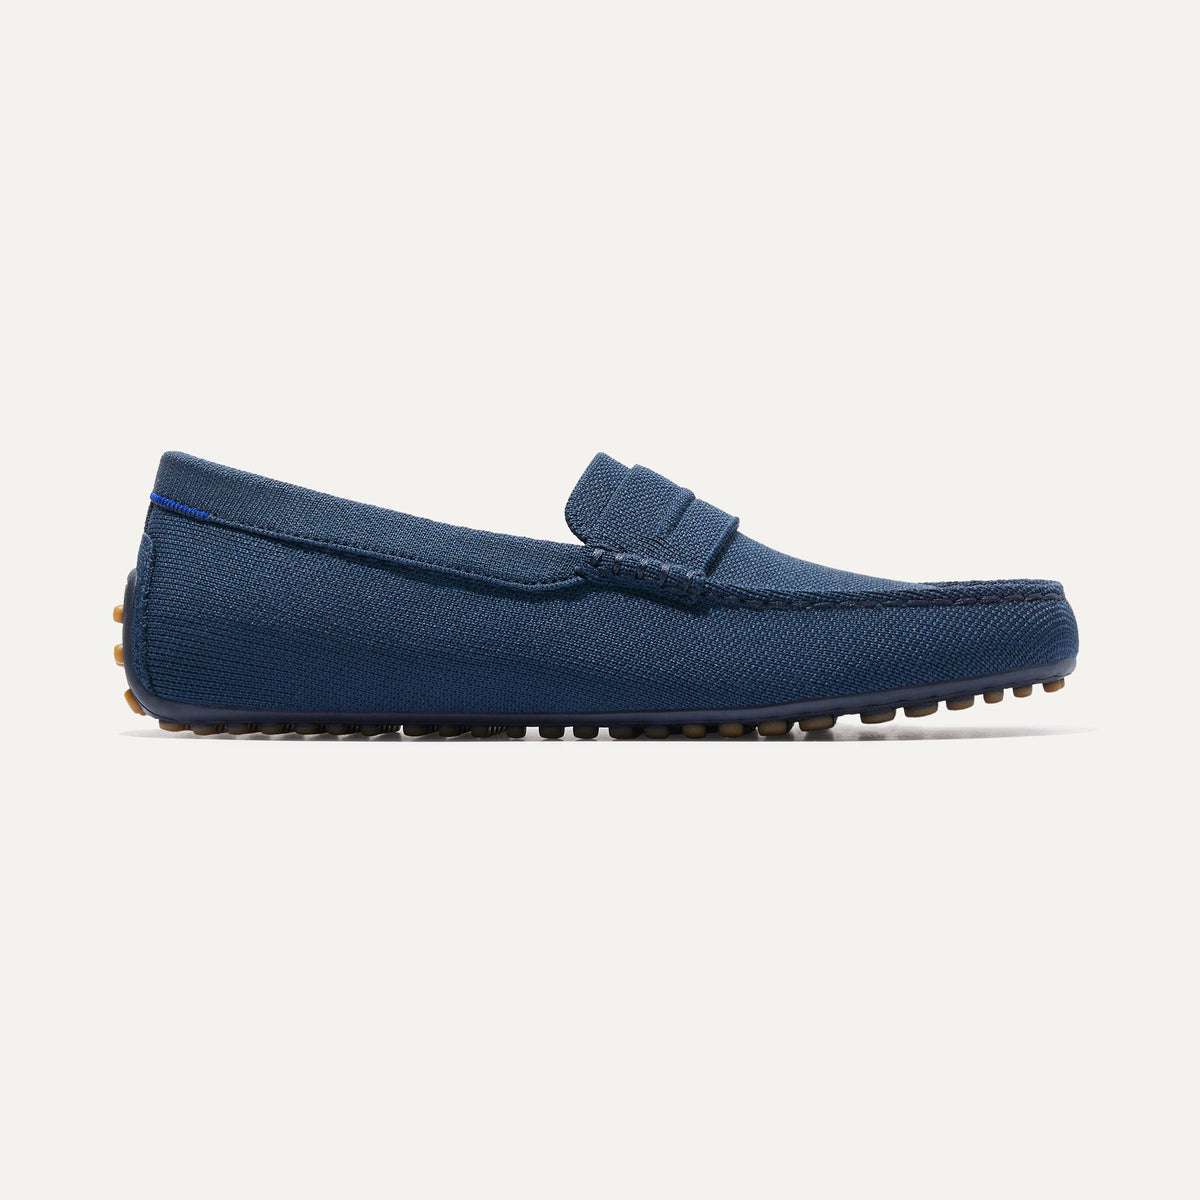 The Driving Loafer in Navy | Men's Men’s Slip-on Loafers | Rothy's